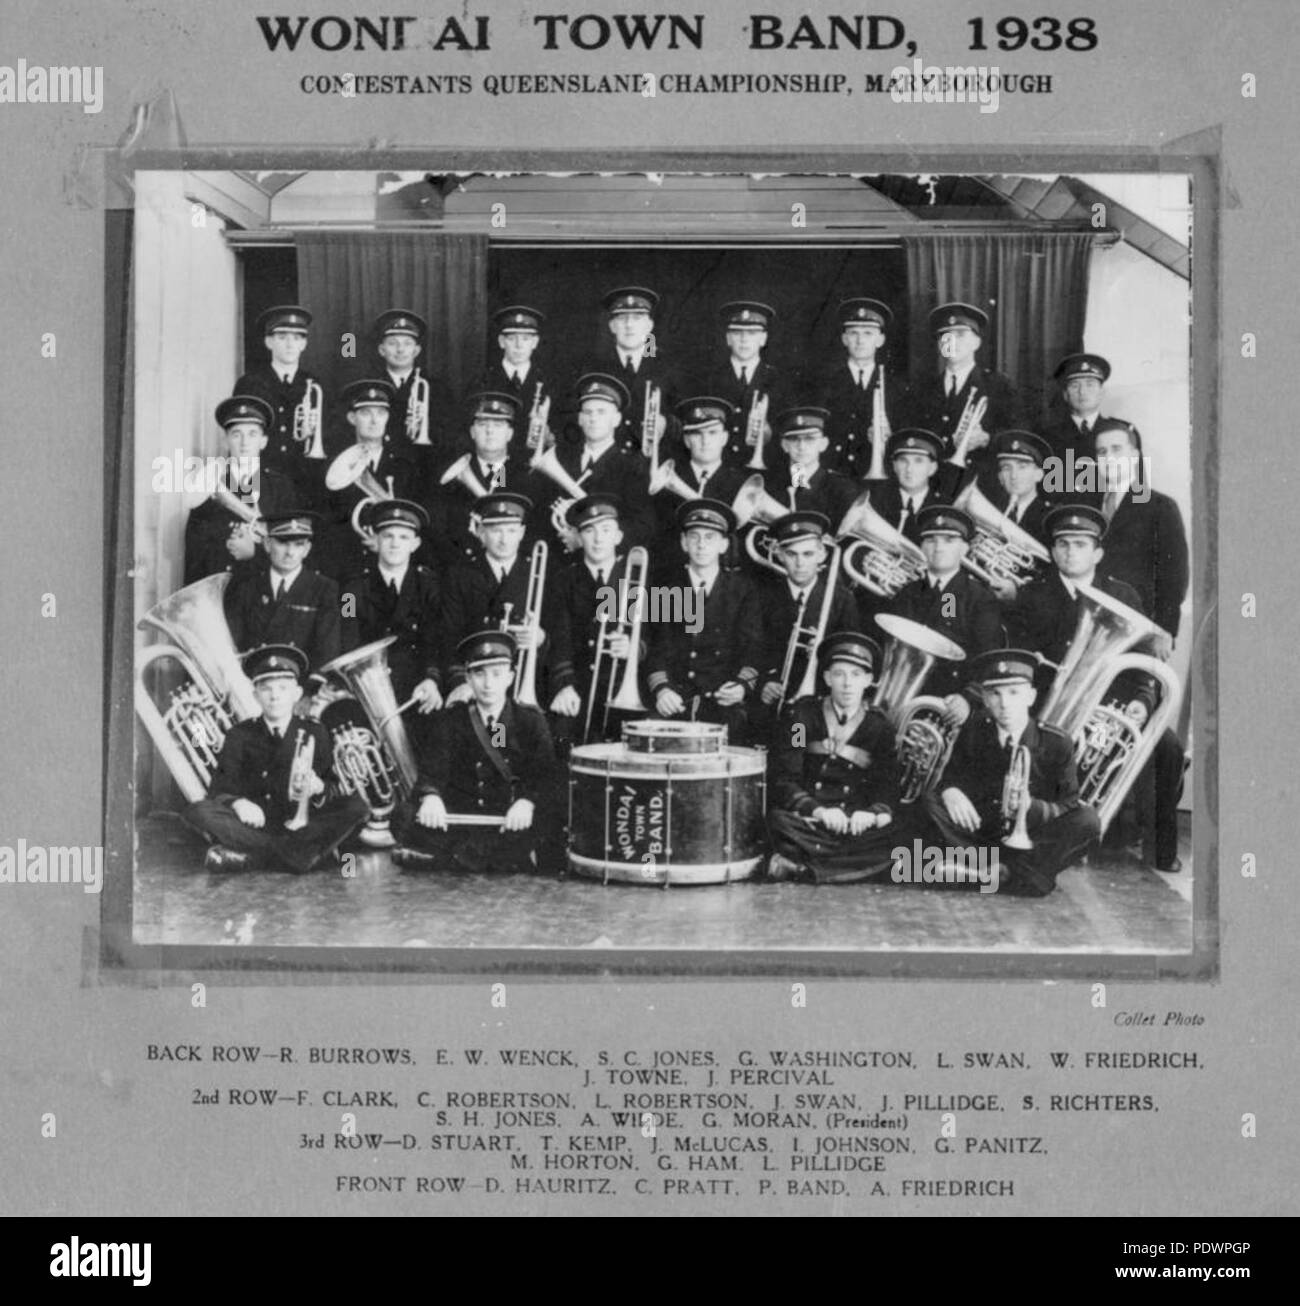 279 StateLibQld 2 103602 Wondai Town Band contestants for the Queensland Championship, Maryborough, 1938 Stock Photo